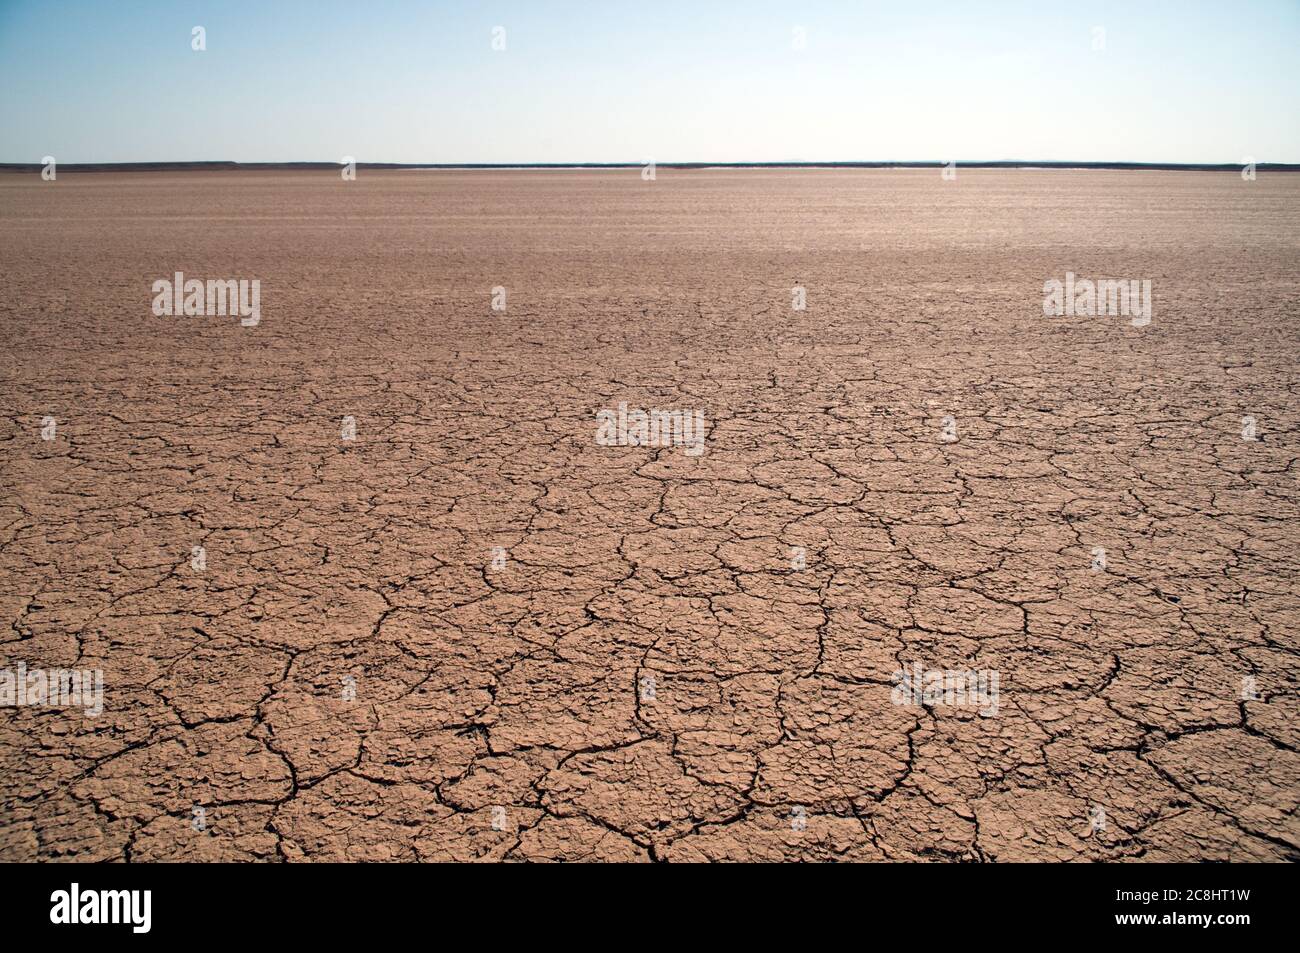 Dry, parched and cracked mud patterns after a rainfall in the eastern desert of the Badia region of the Hashemite Kingdom of Jordan. Stock Photo